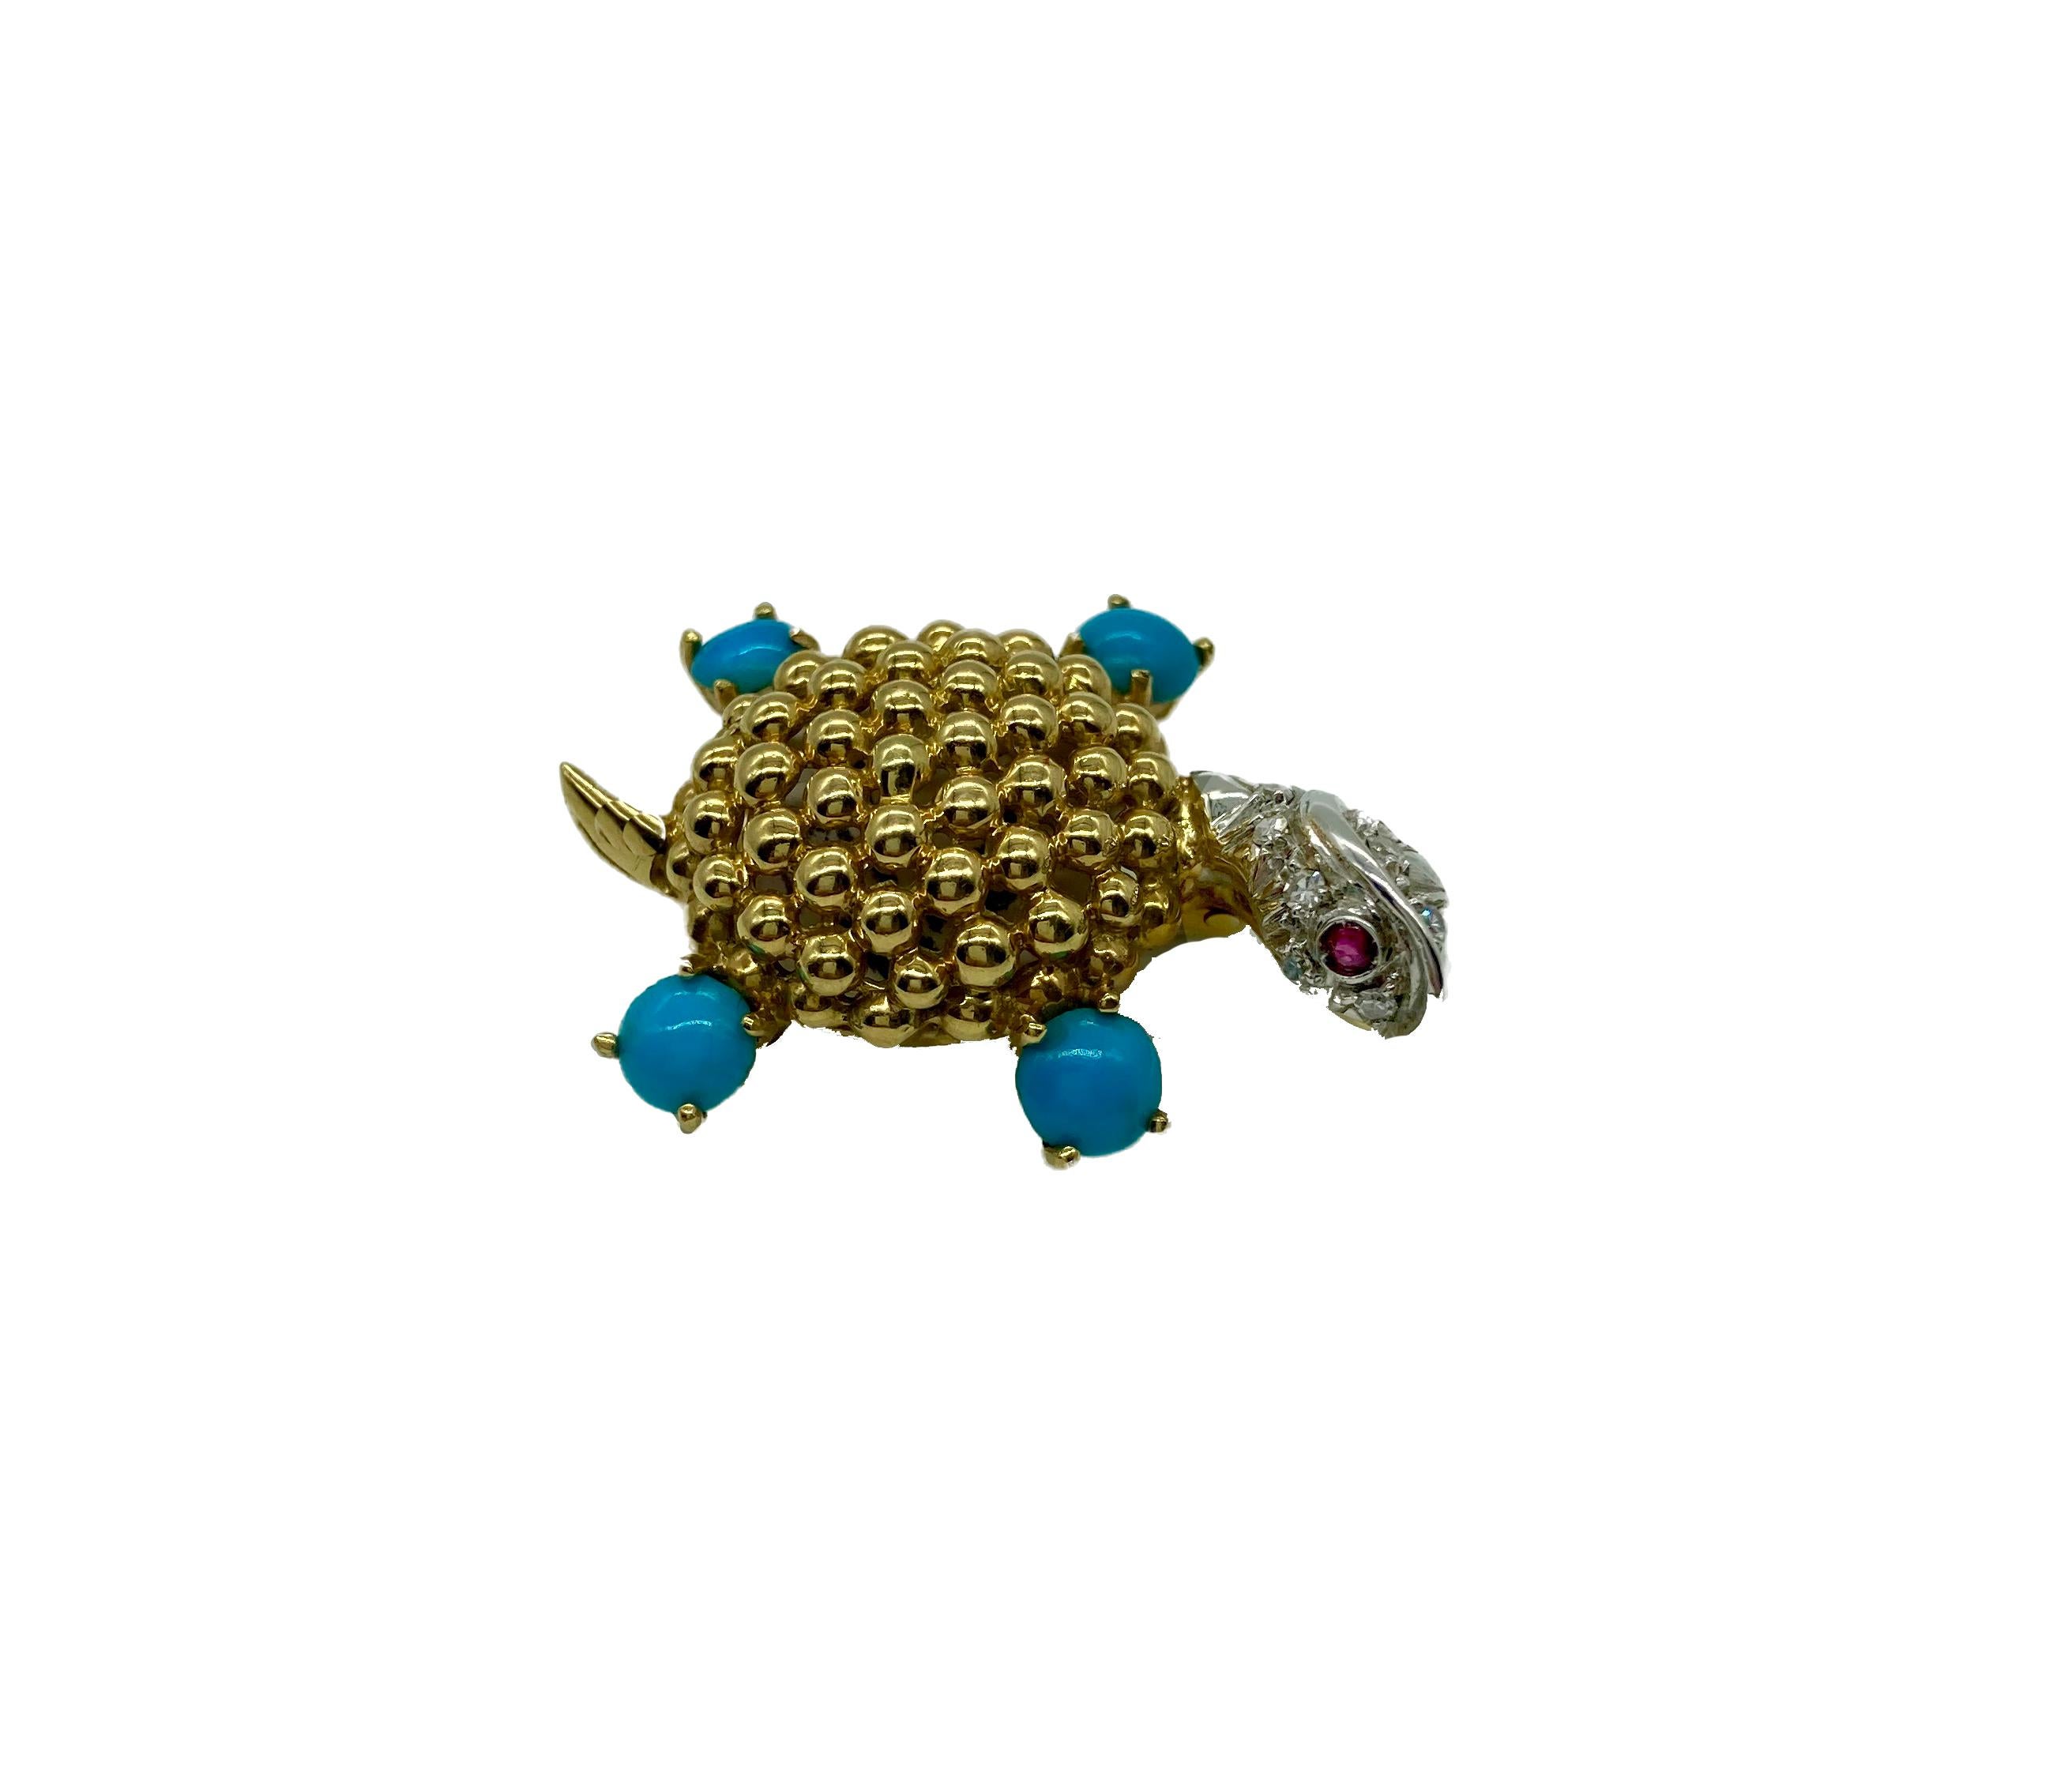 A petite textured gold turtle brooch with turquoise legs, a diamond head, and ruby eyes. Circa 1970s.